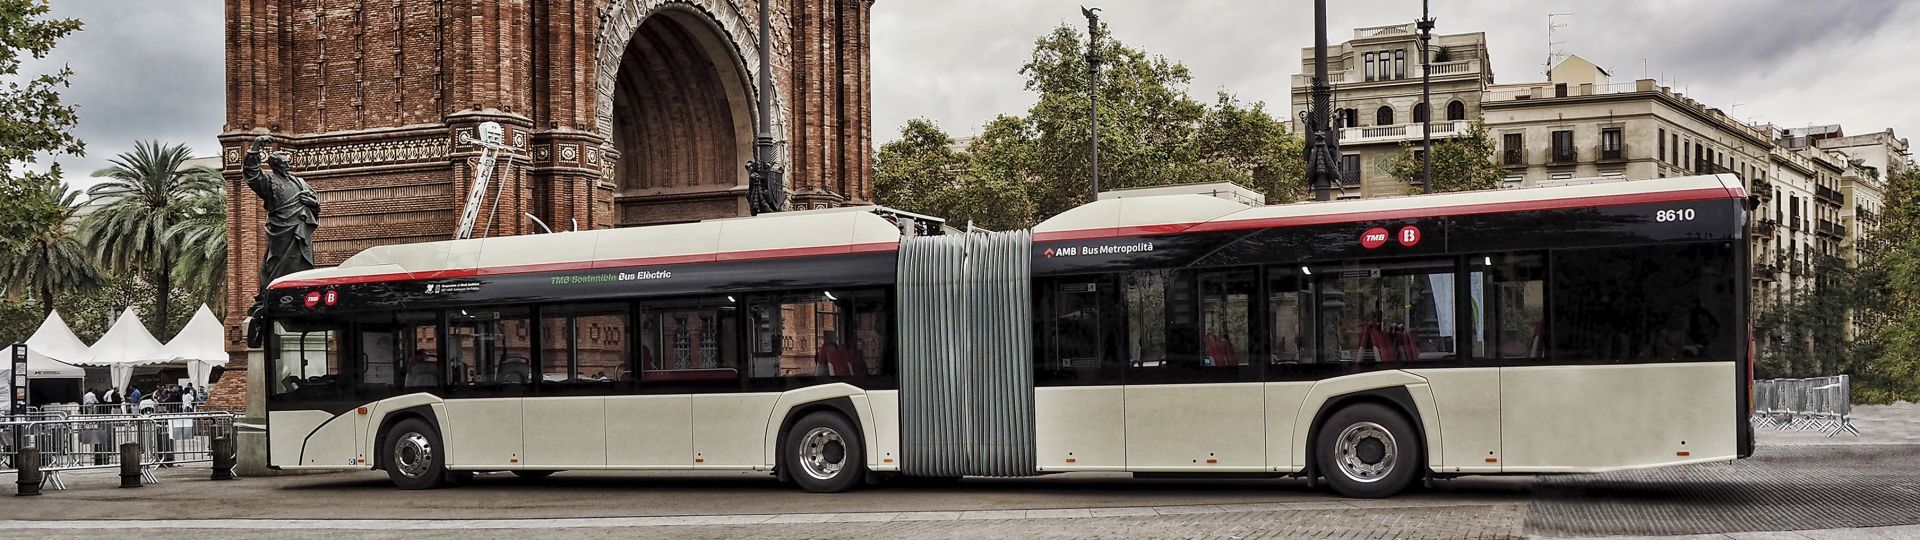 Electric Solaris buses in Barcelona